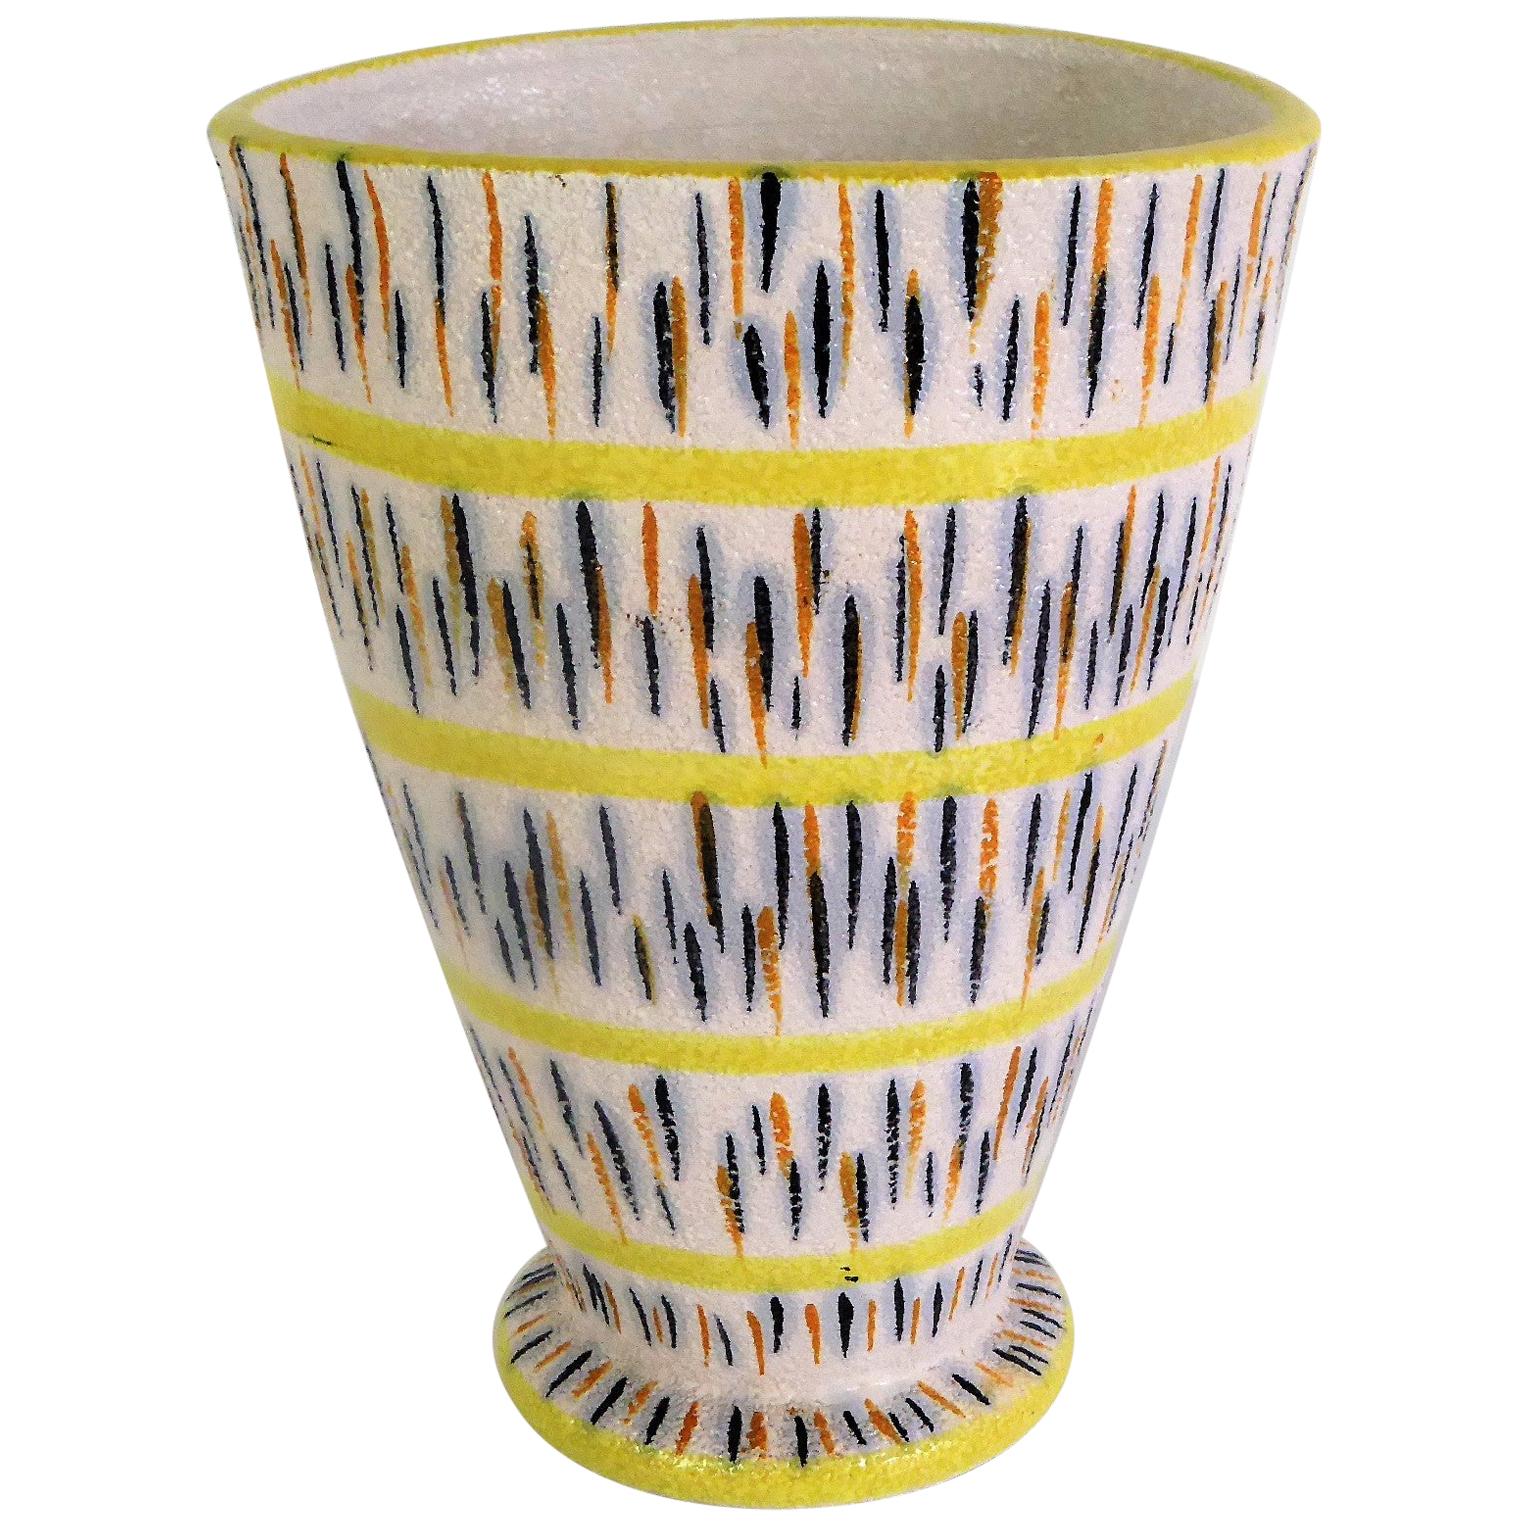 1960s Mid-Century Modern Pottery Vase Attributed to Aldo Londi for Bitossi